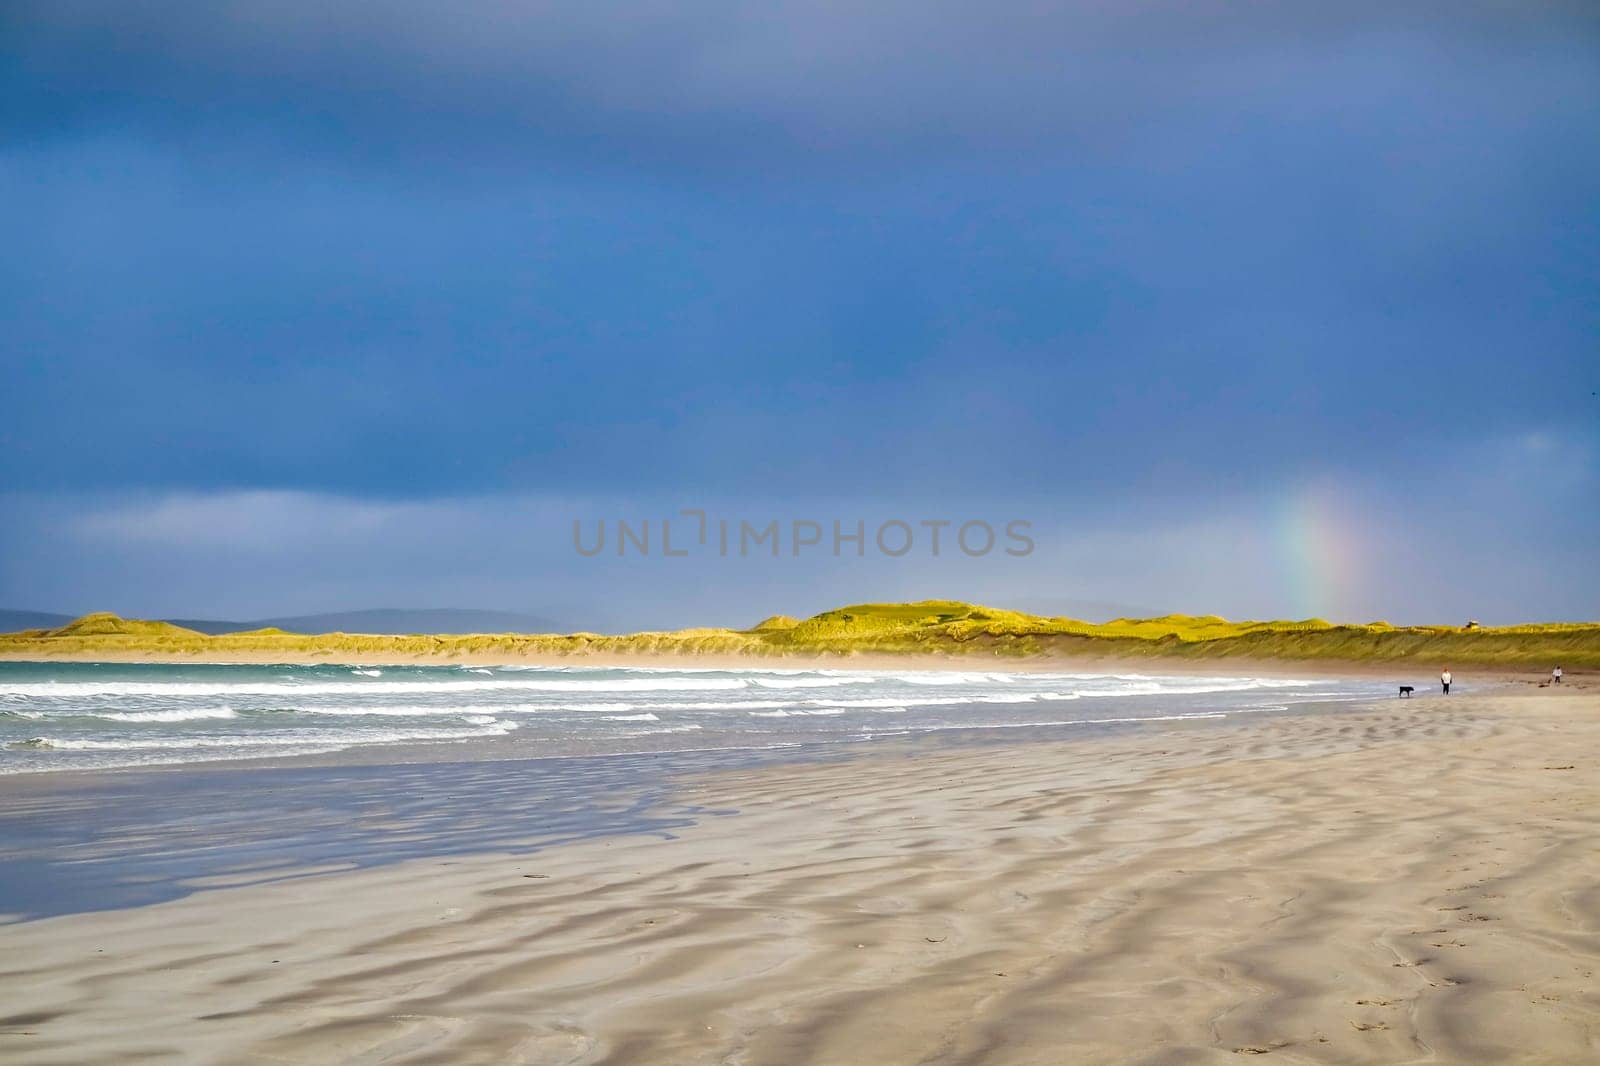 Narin Strand is a beautiful large blue flag beach in Portnoo, County Donegal - Ireland.